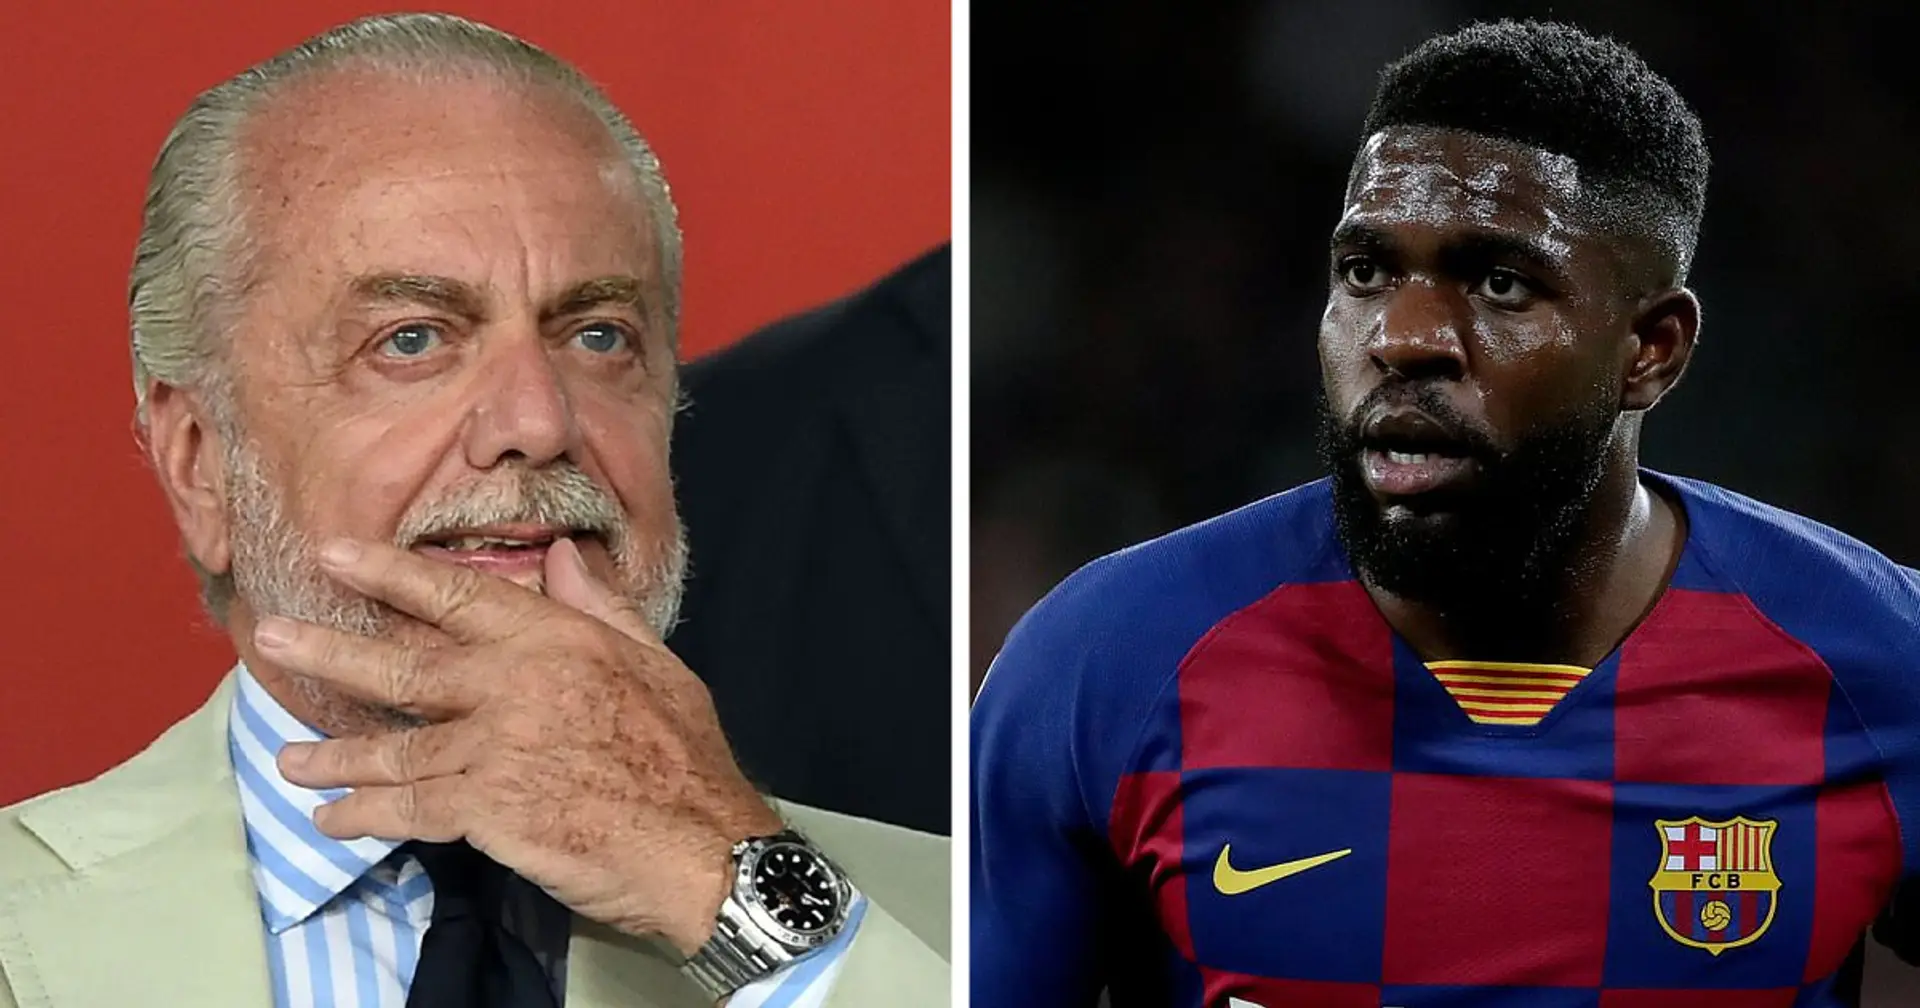 Napoli reportedly drop interest in Umtiti with price deemed too high